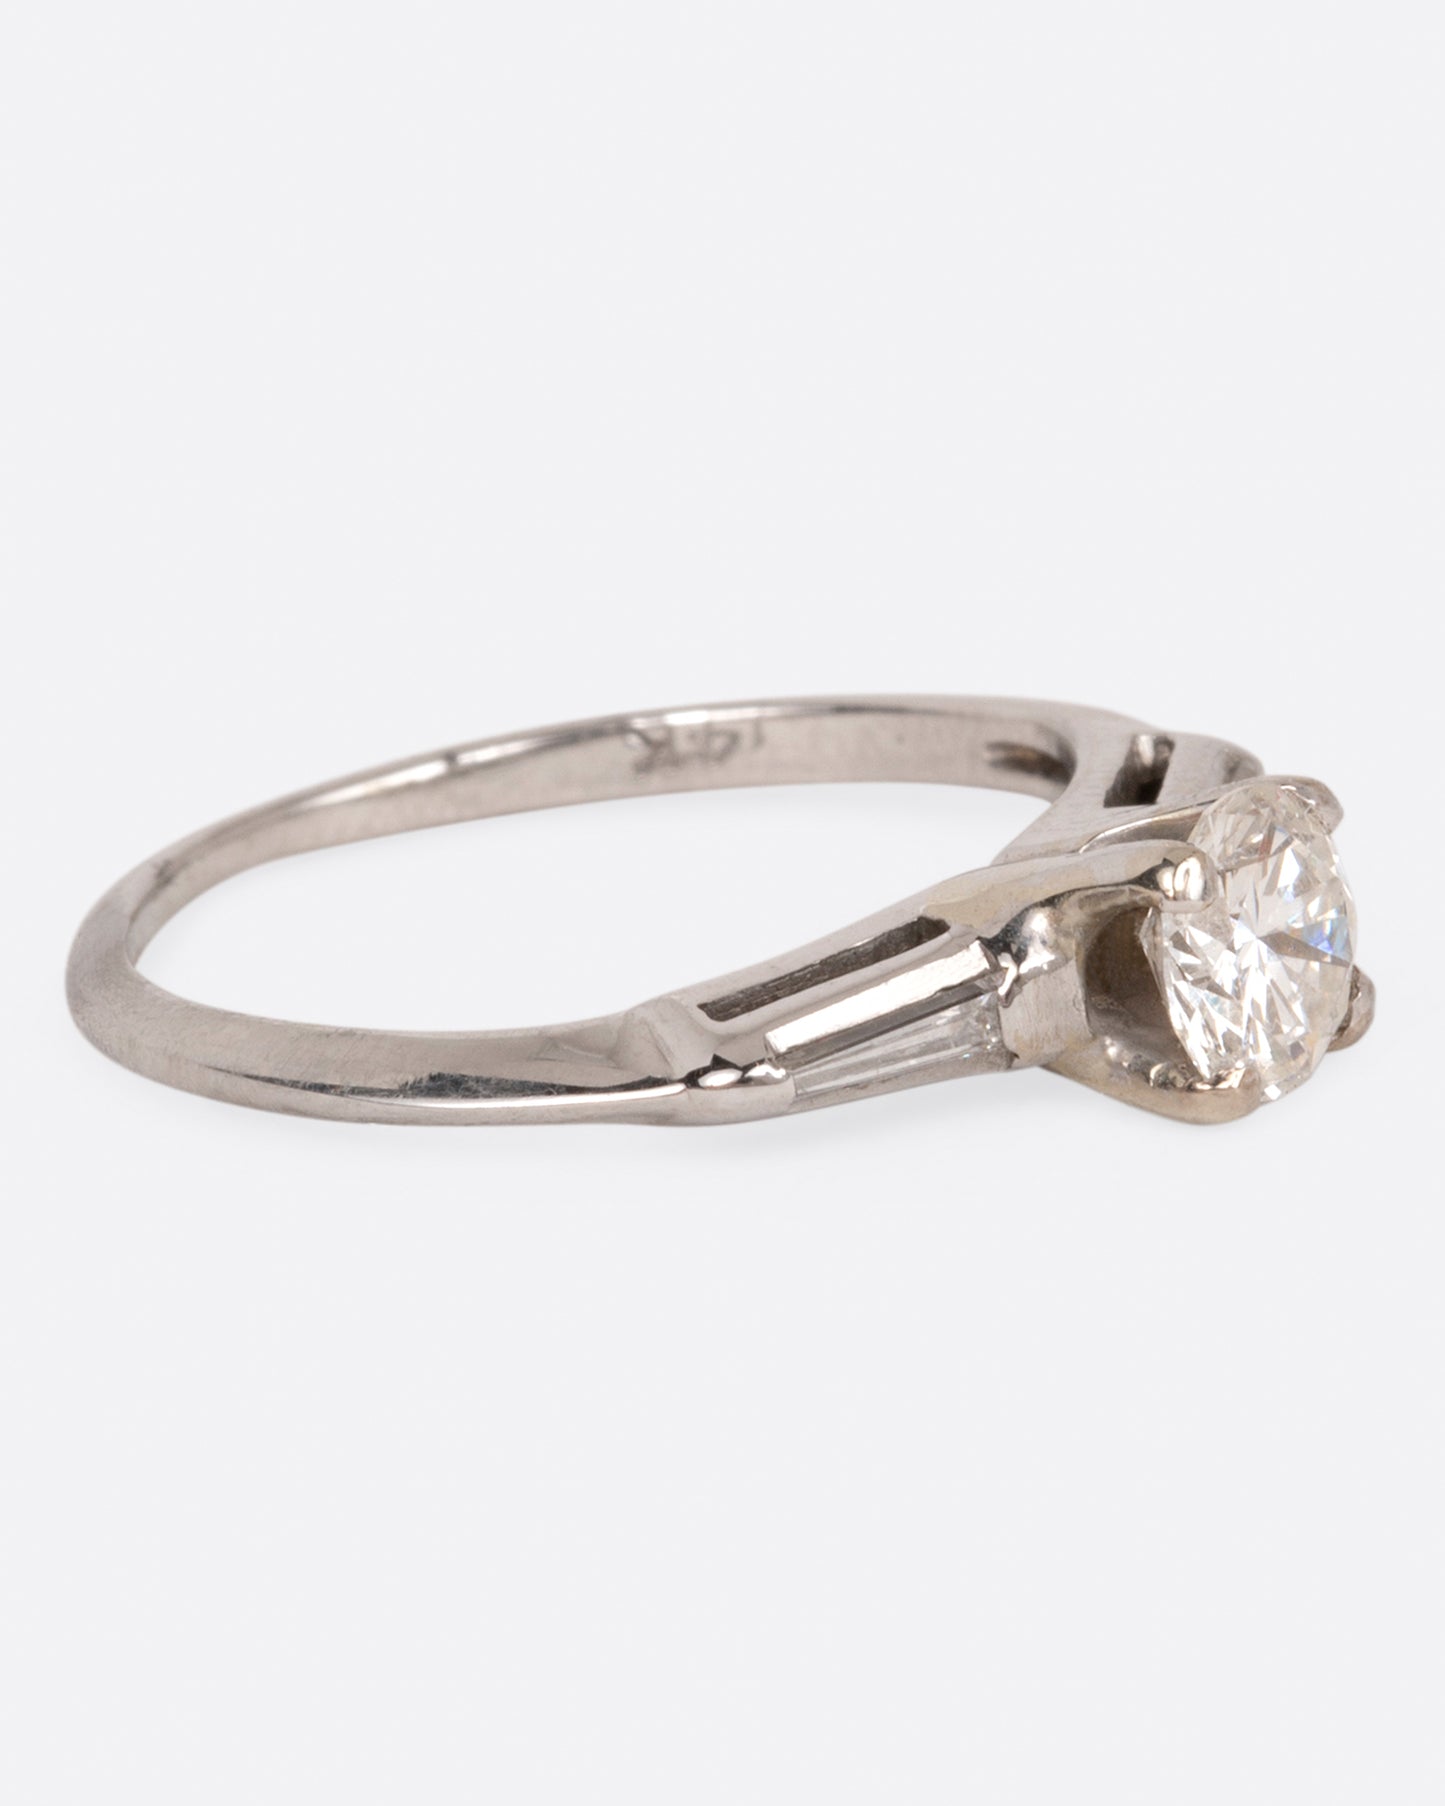 A white gold ring with a round prong-set diamond at the center and tapered baguette diamonds on either side, shown from the side.